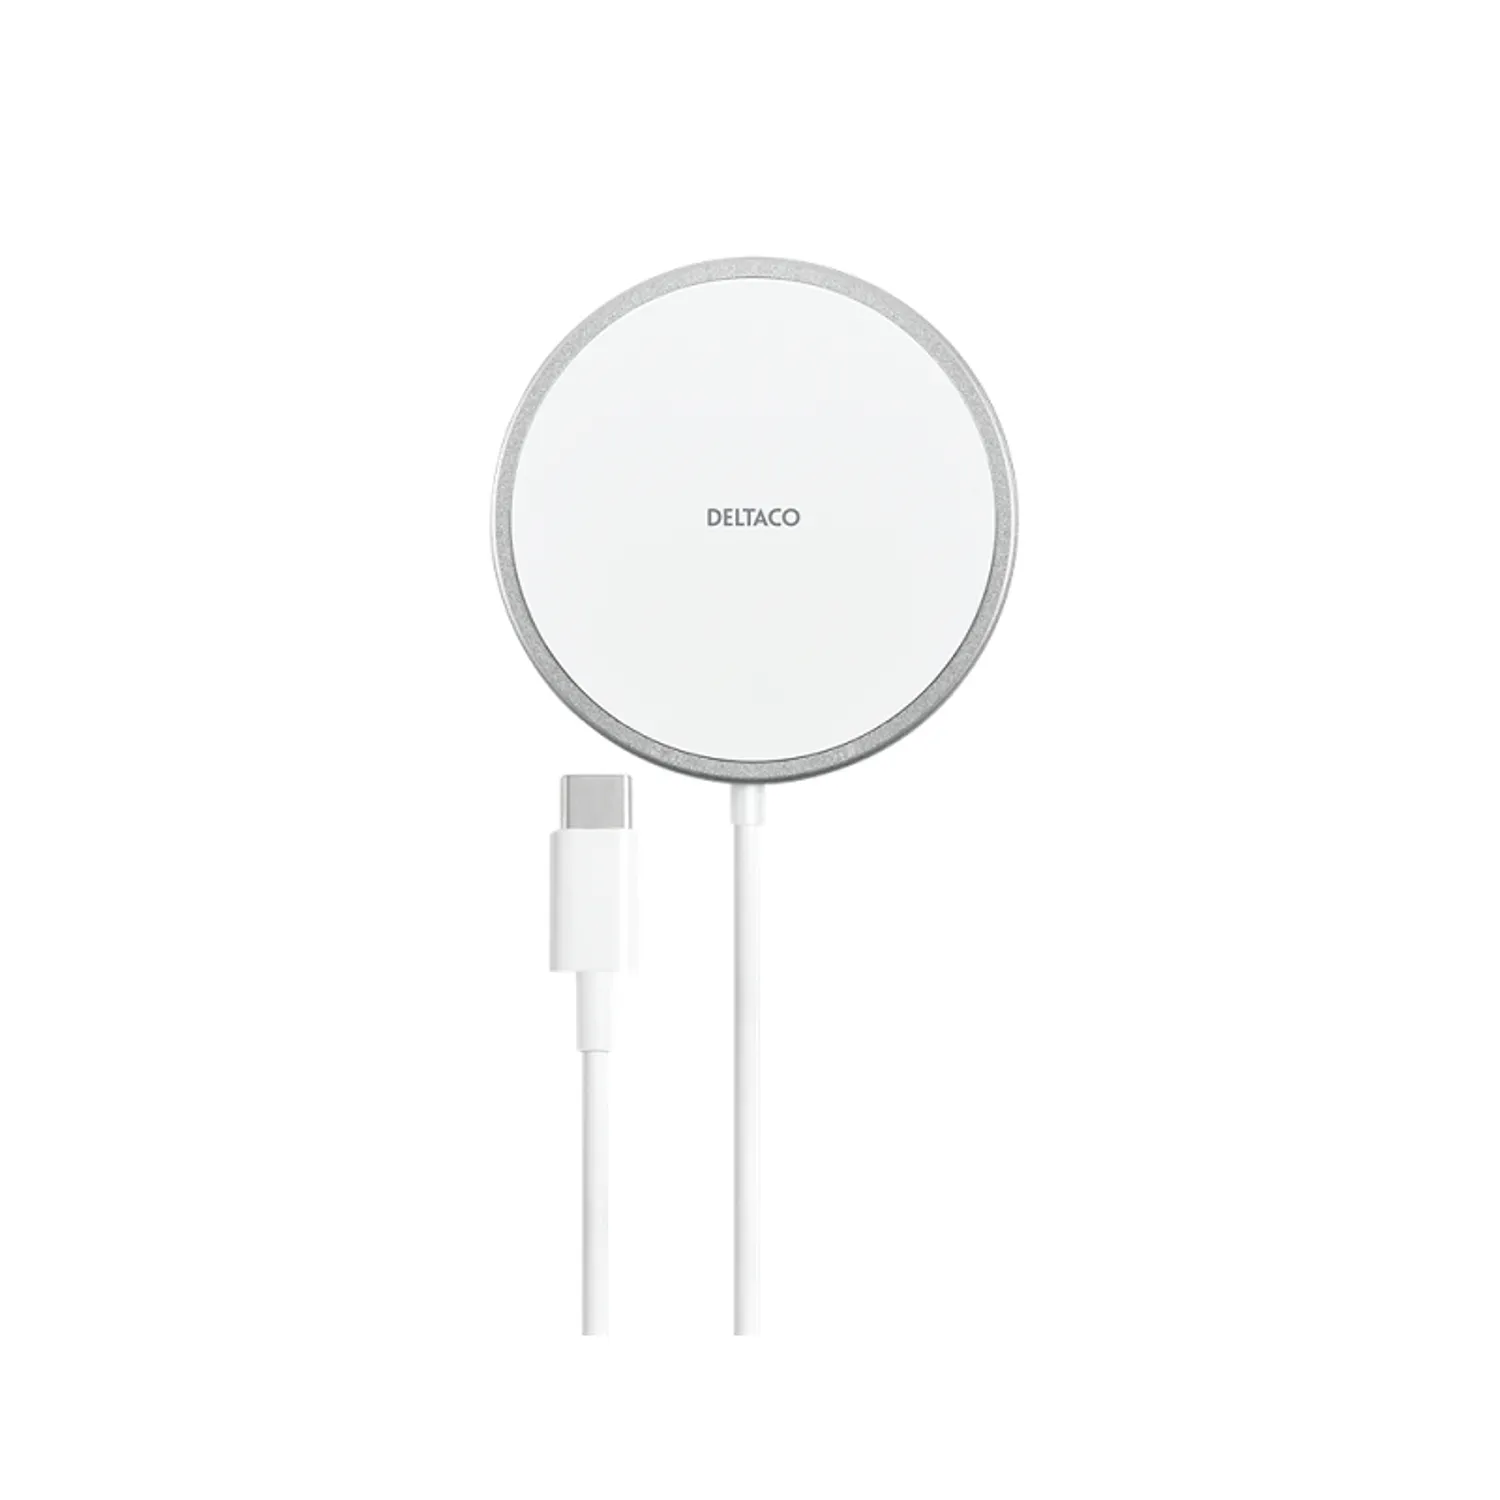 Magnetic wireless charger, 15 W, USB-C, white/silver